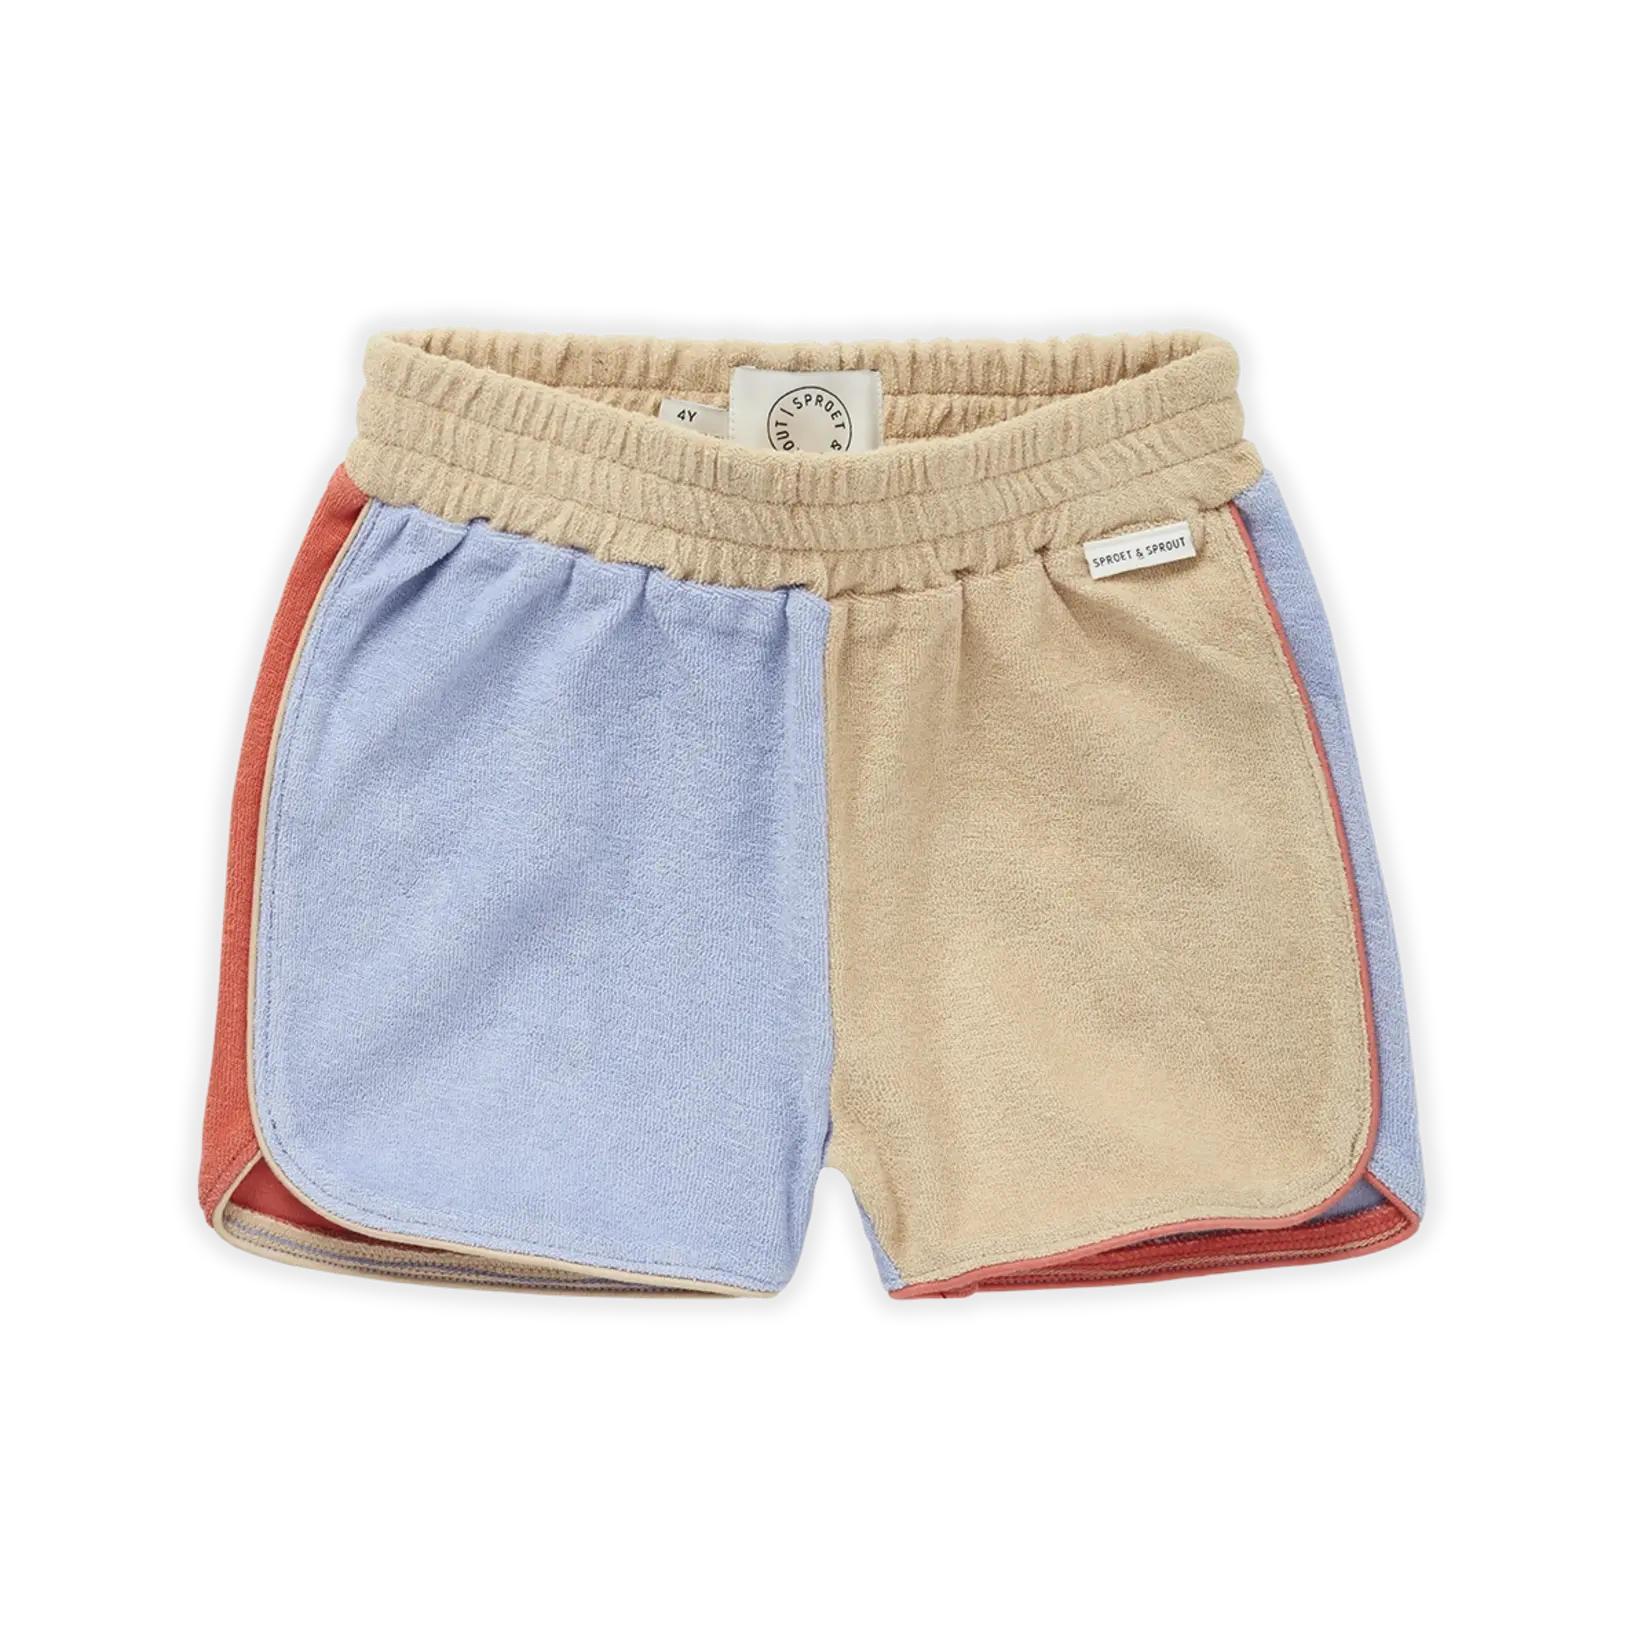 Sproet & Sprout Sproet & Sprout - Terry sport short colourblock - Biscotti